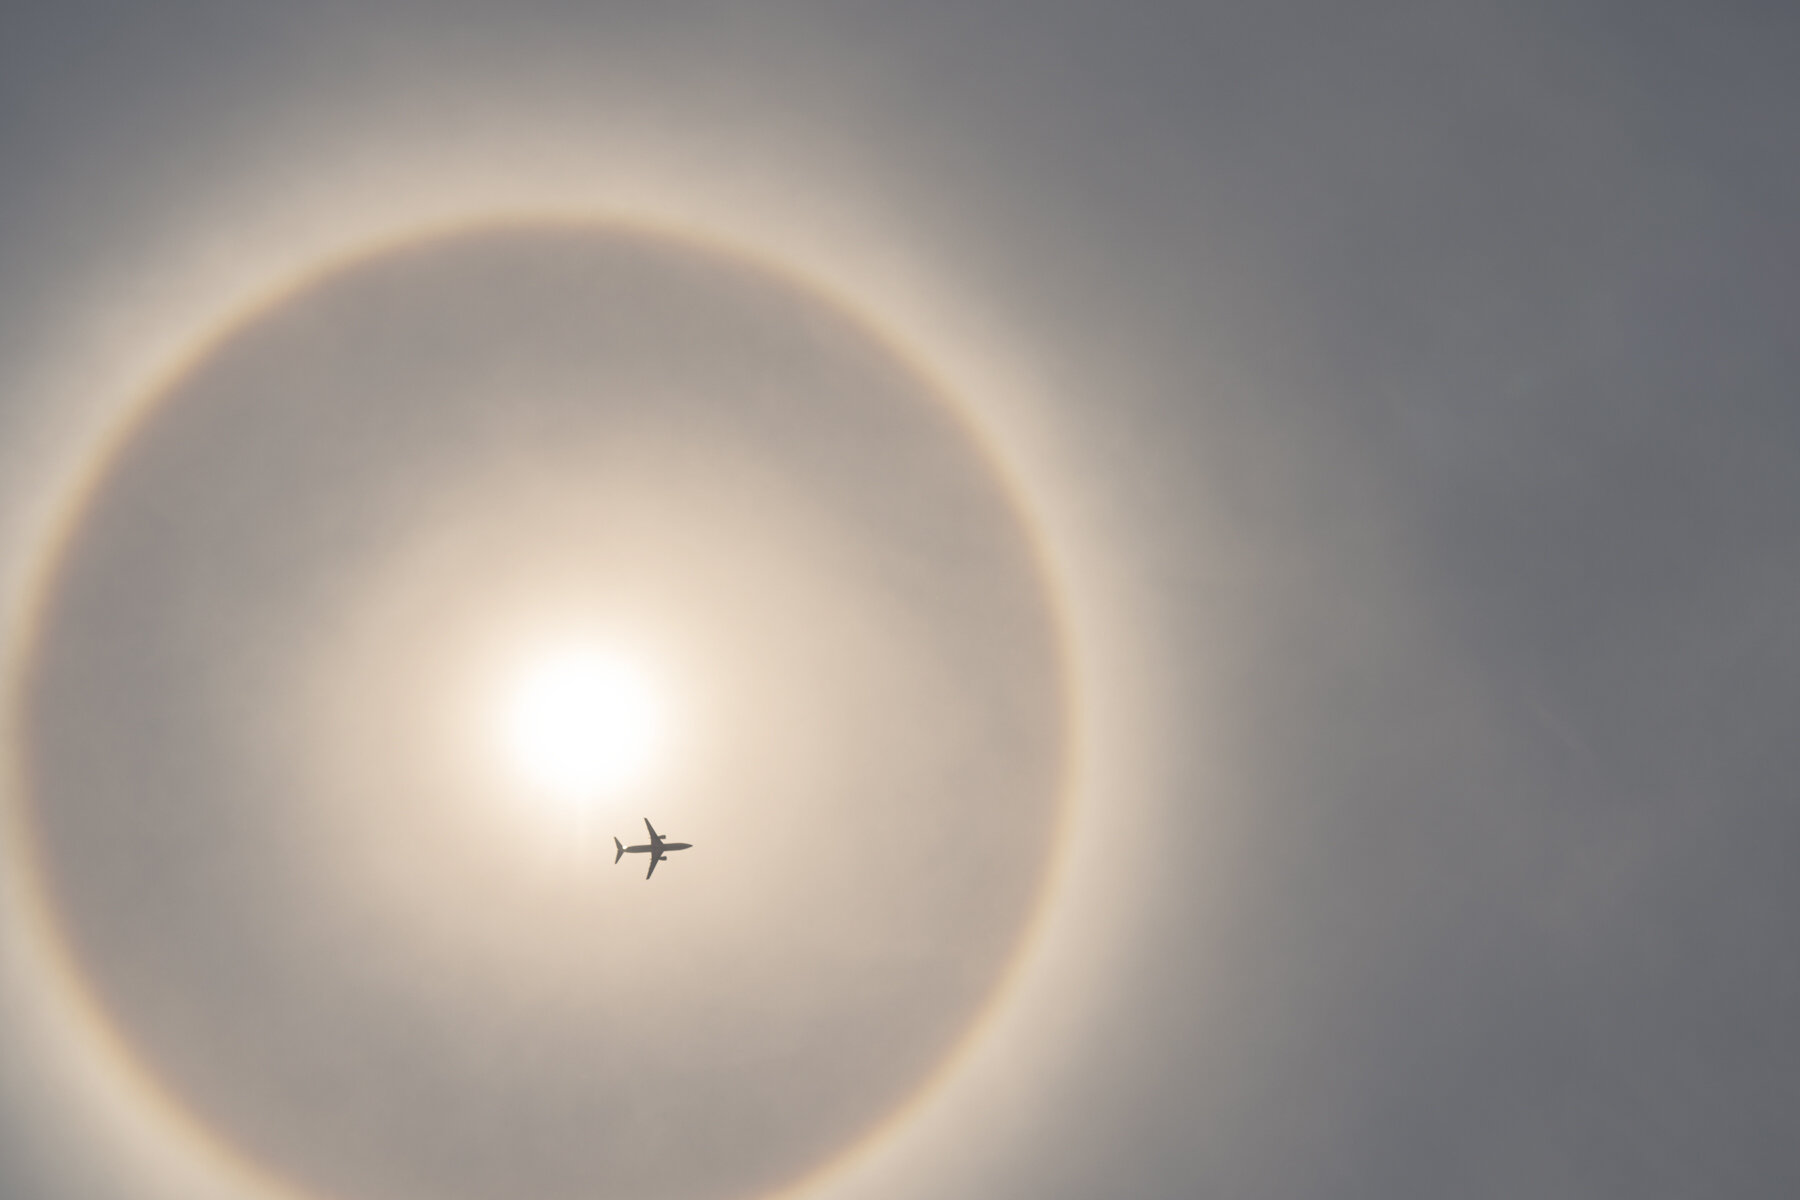 // the halo is an atmospheric optical phenomenon that result when the sun shines through thin clouds composed of ice crystals.